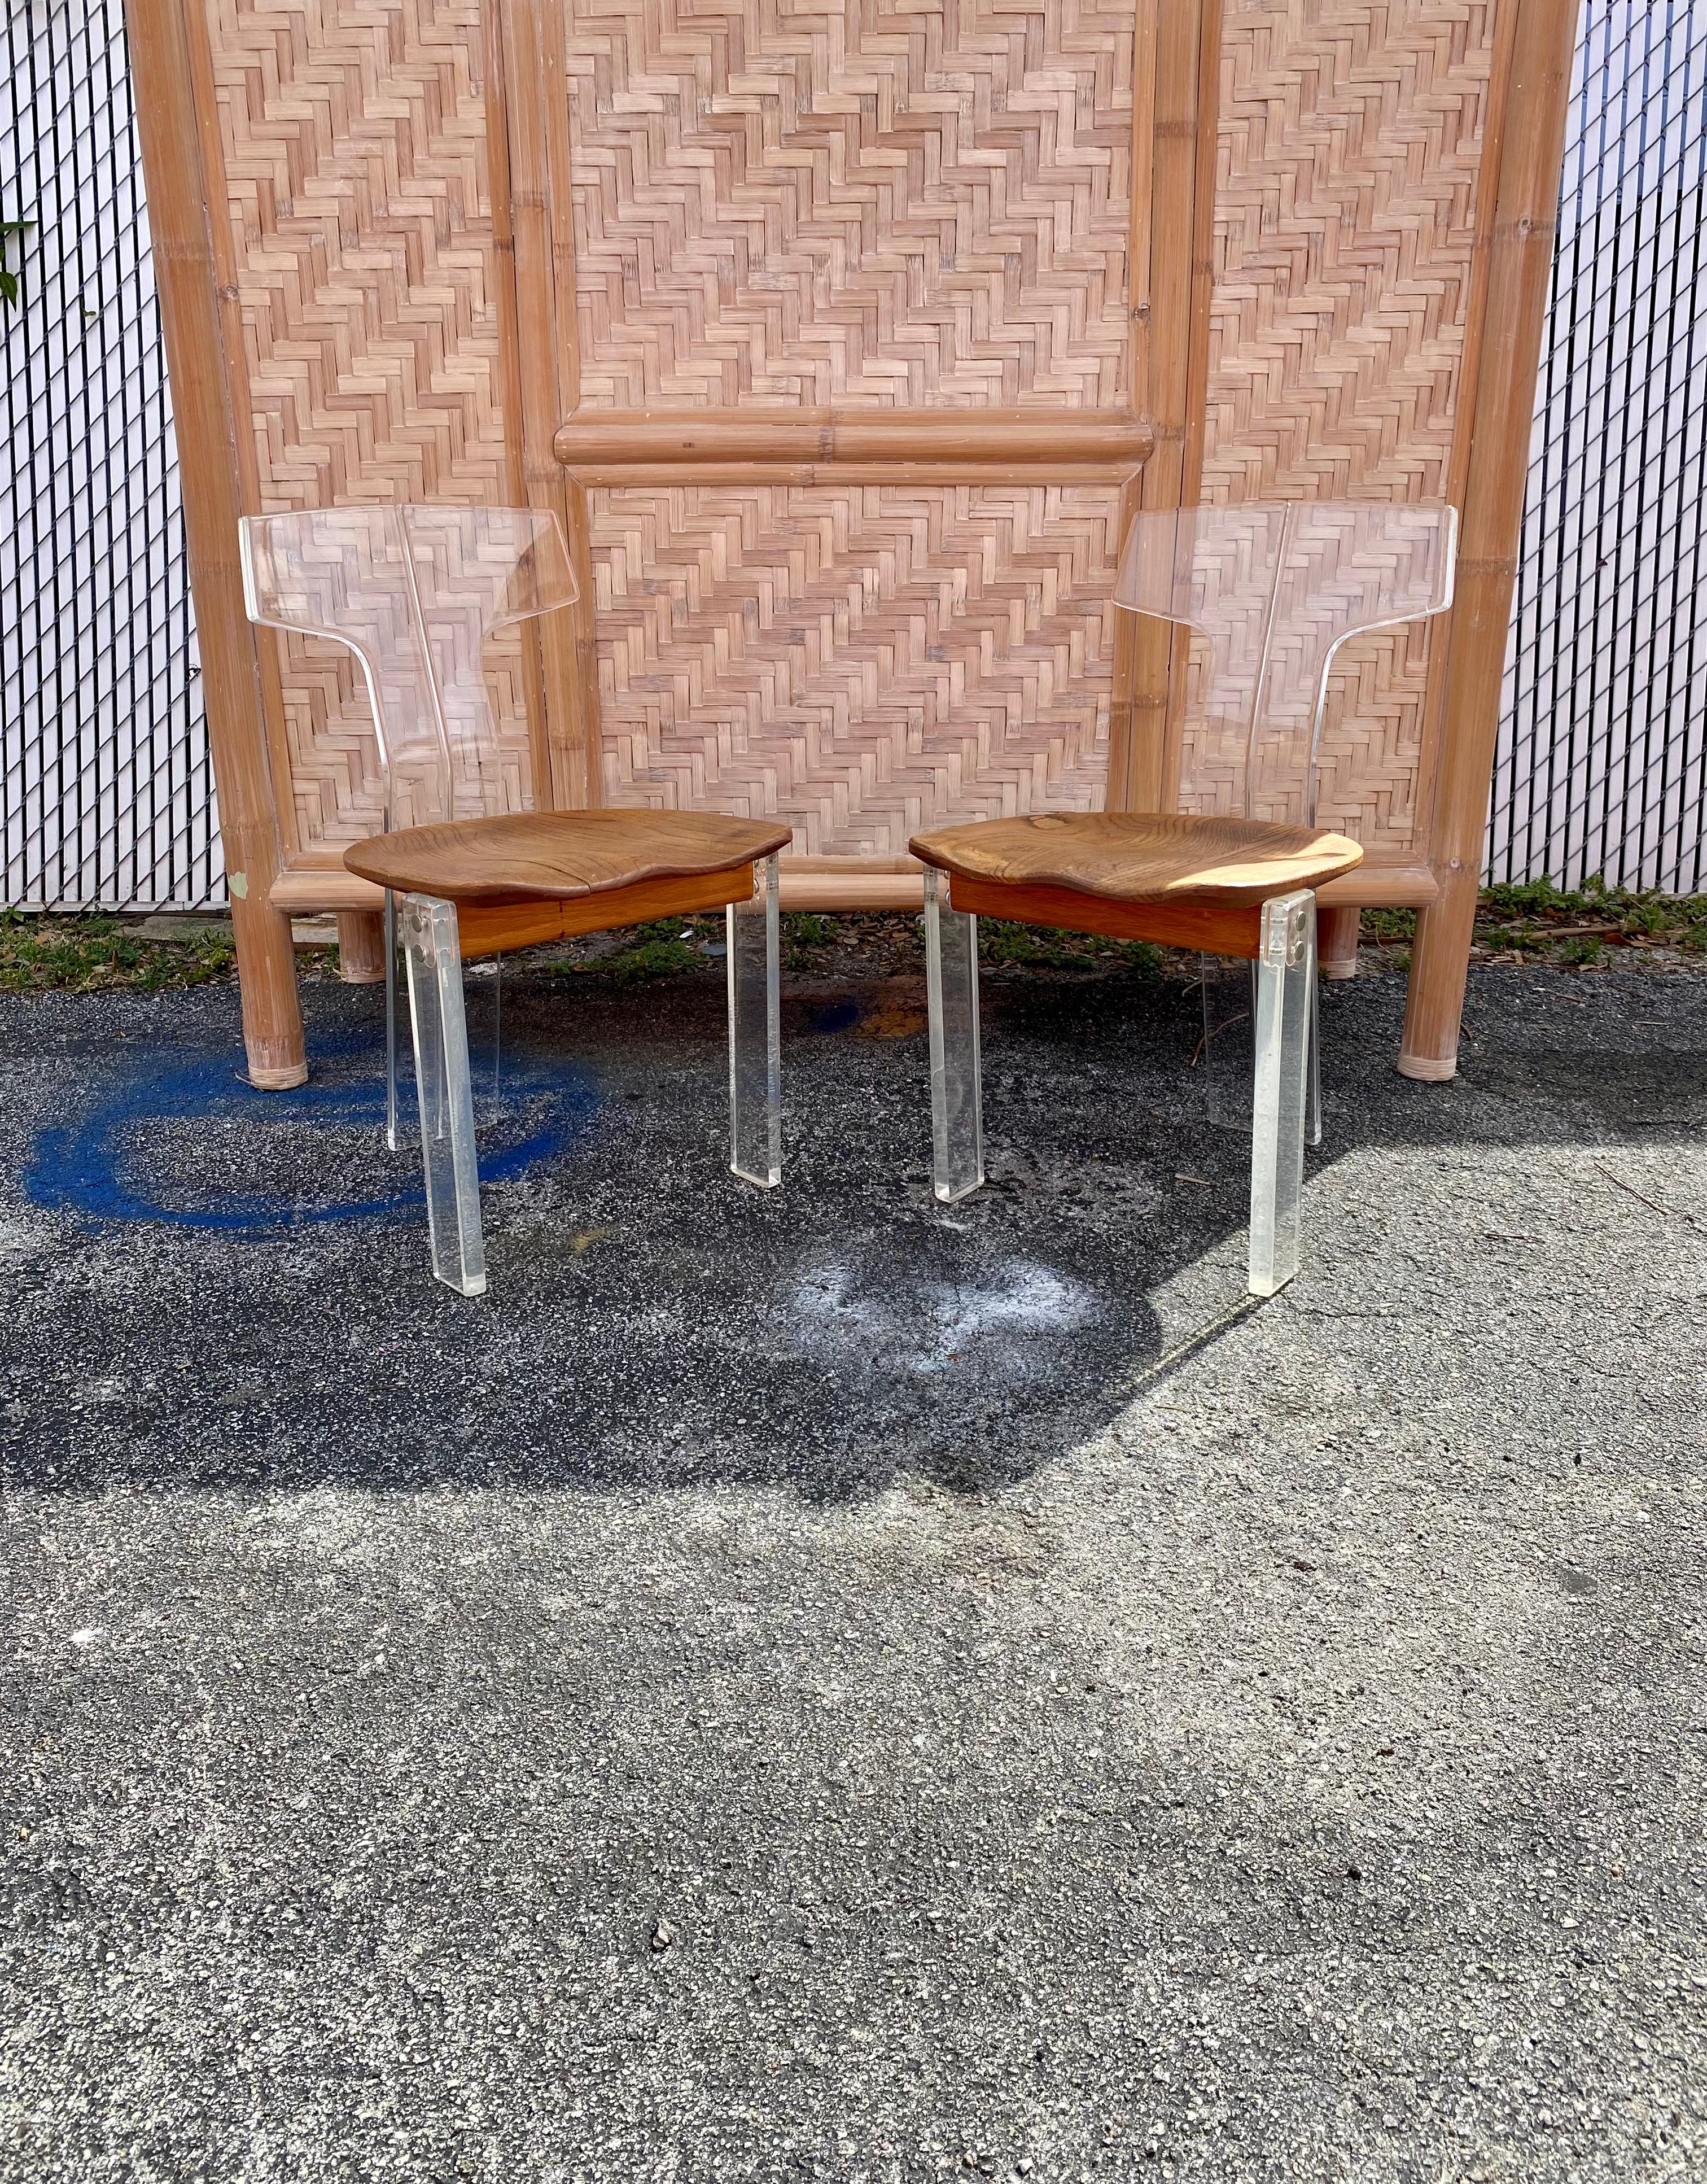 On offer on this occasion is one of the most stunning and rare lucite and oak chairs set you could hope to find. Outstanding design is exhibited throughout. The beautiful set is statement piece which is also extremely comfortable and packed with